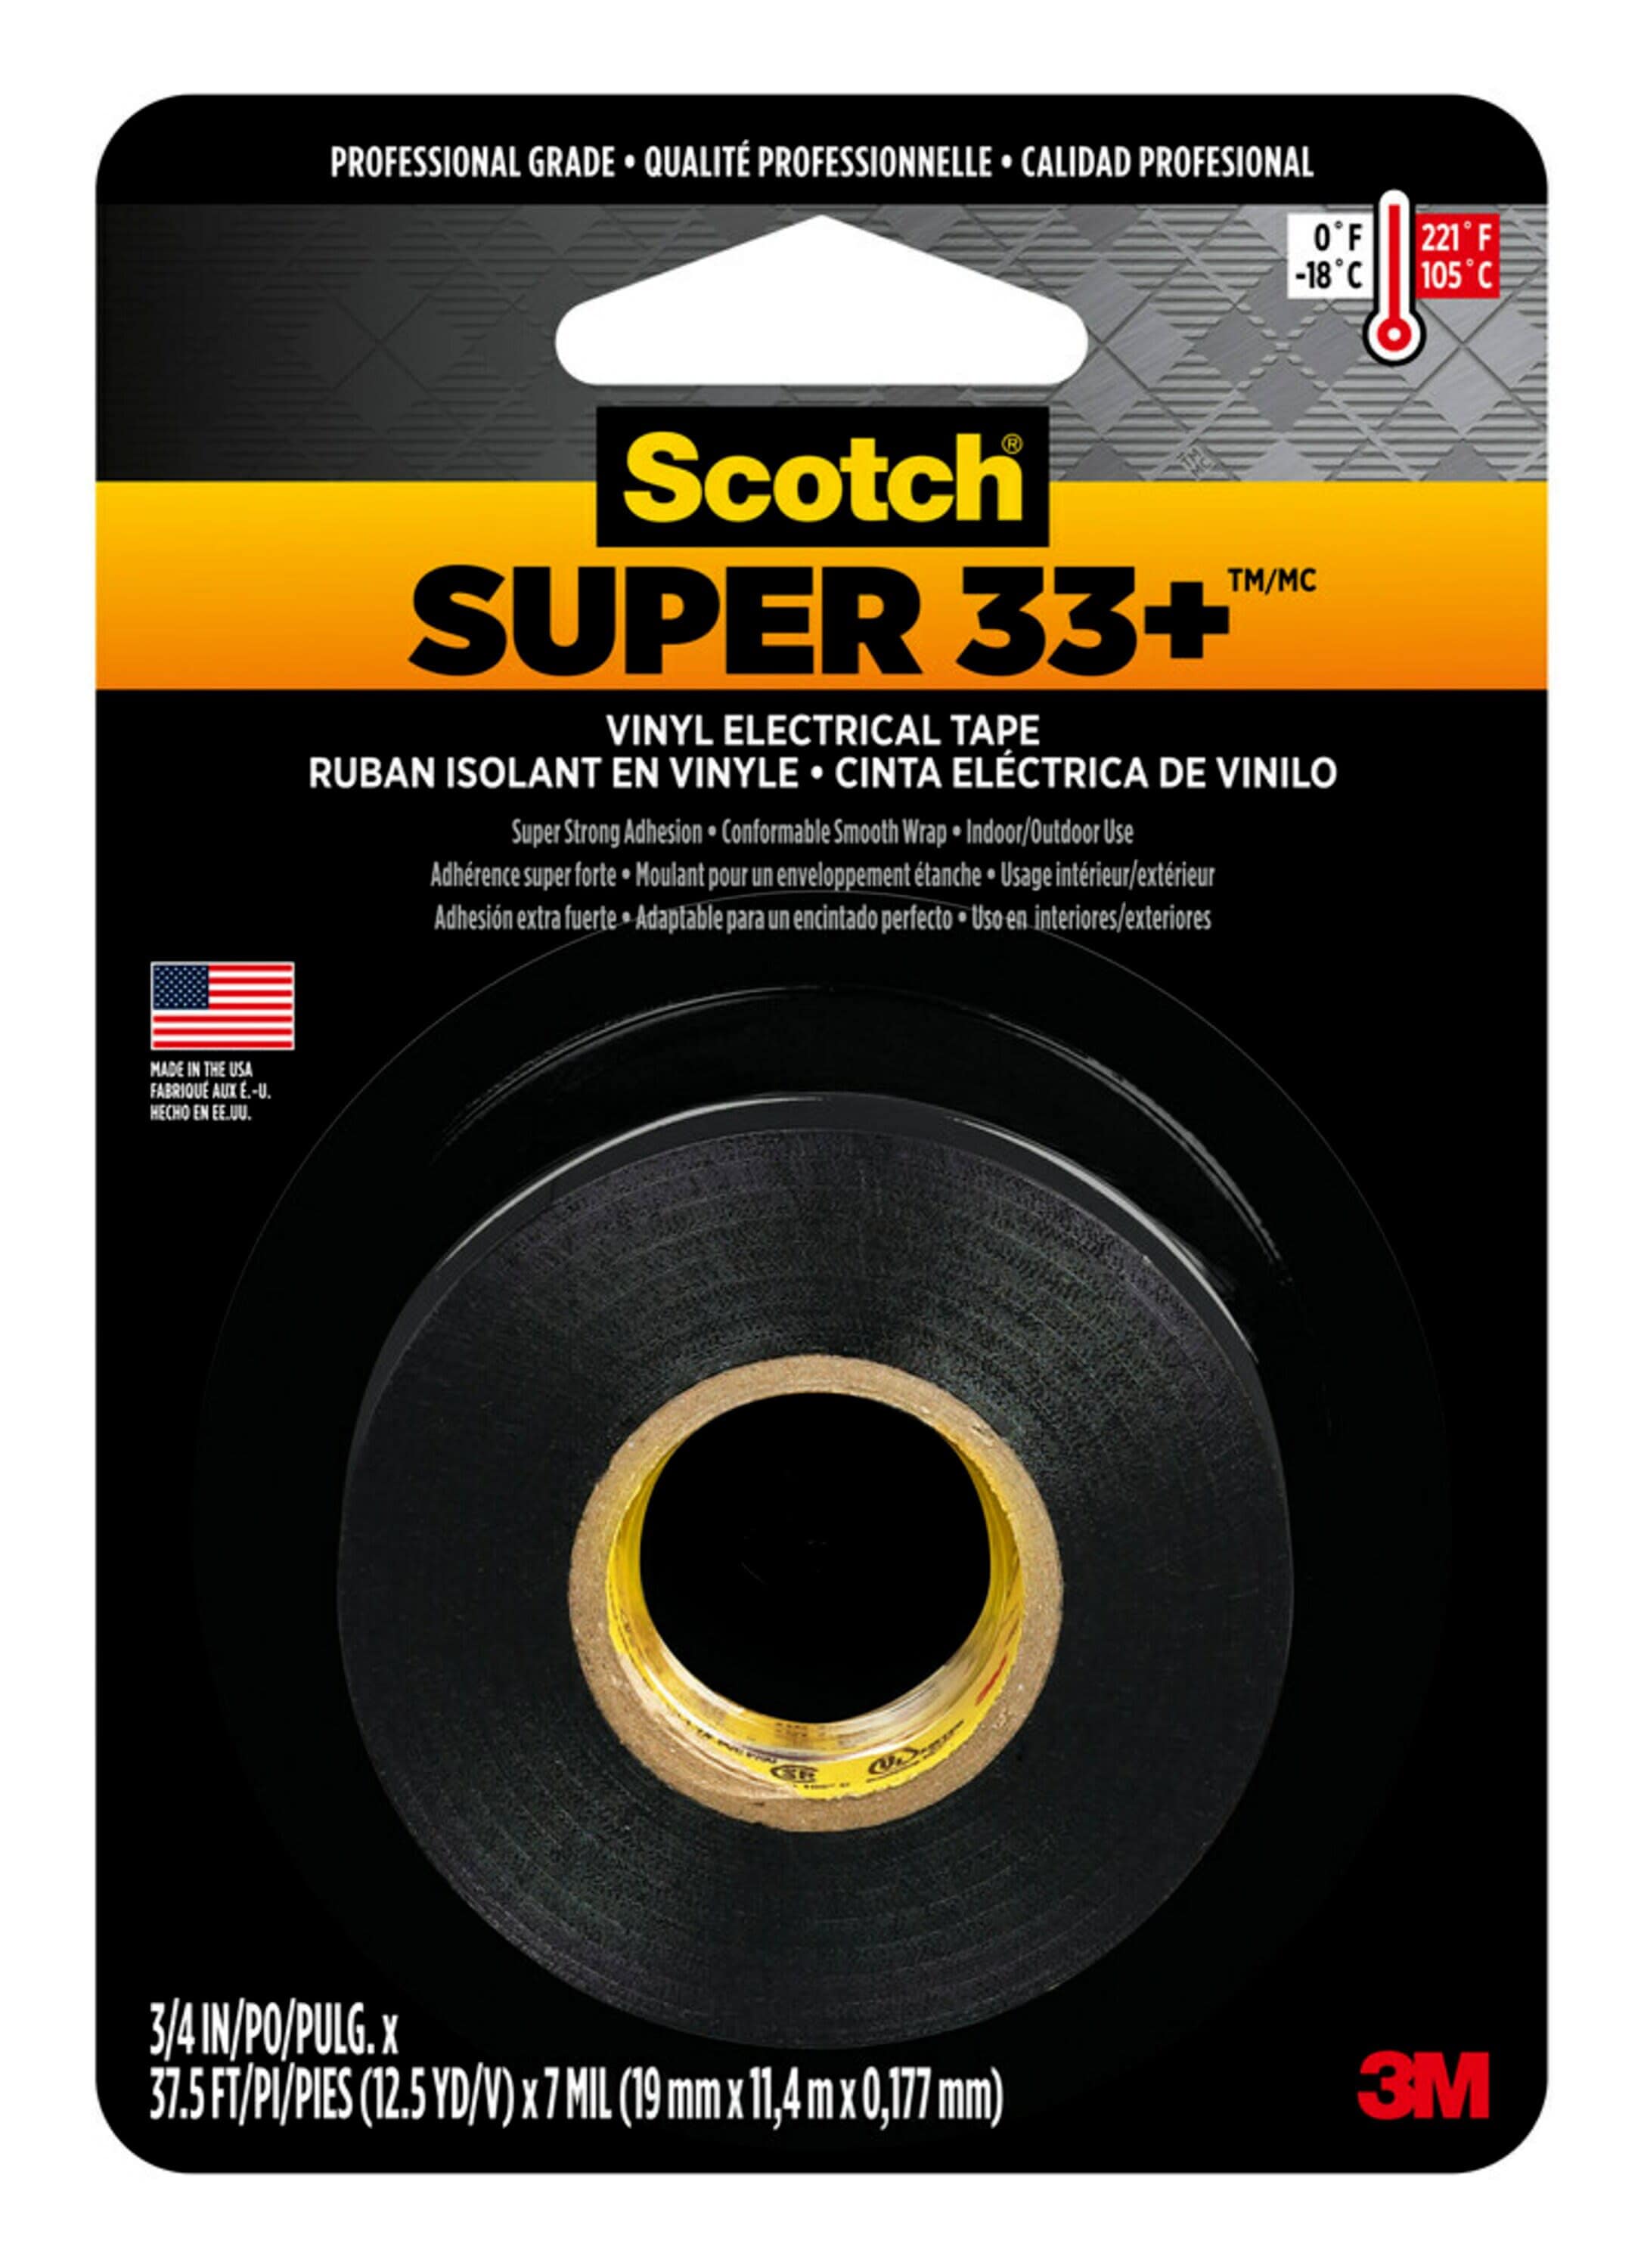 Utilitech 0.5-in x 20-ft Vinyl Electrical Tape Multiple Colors